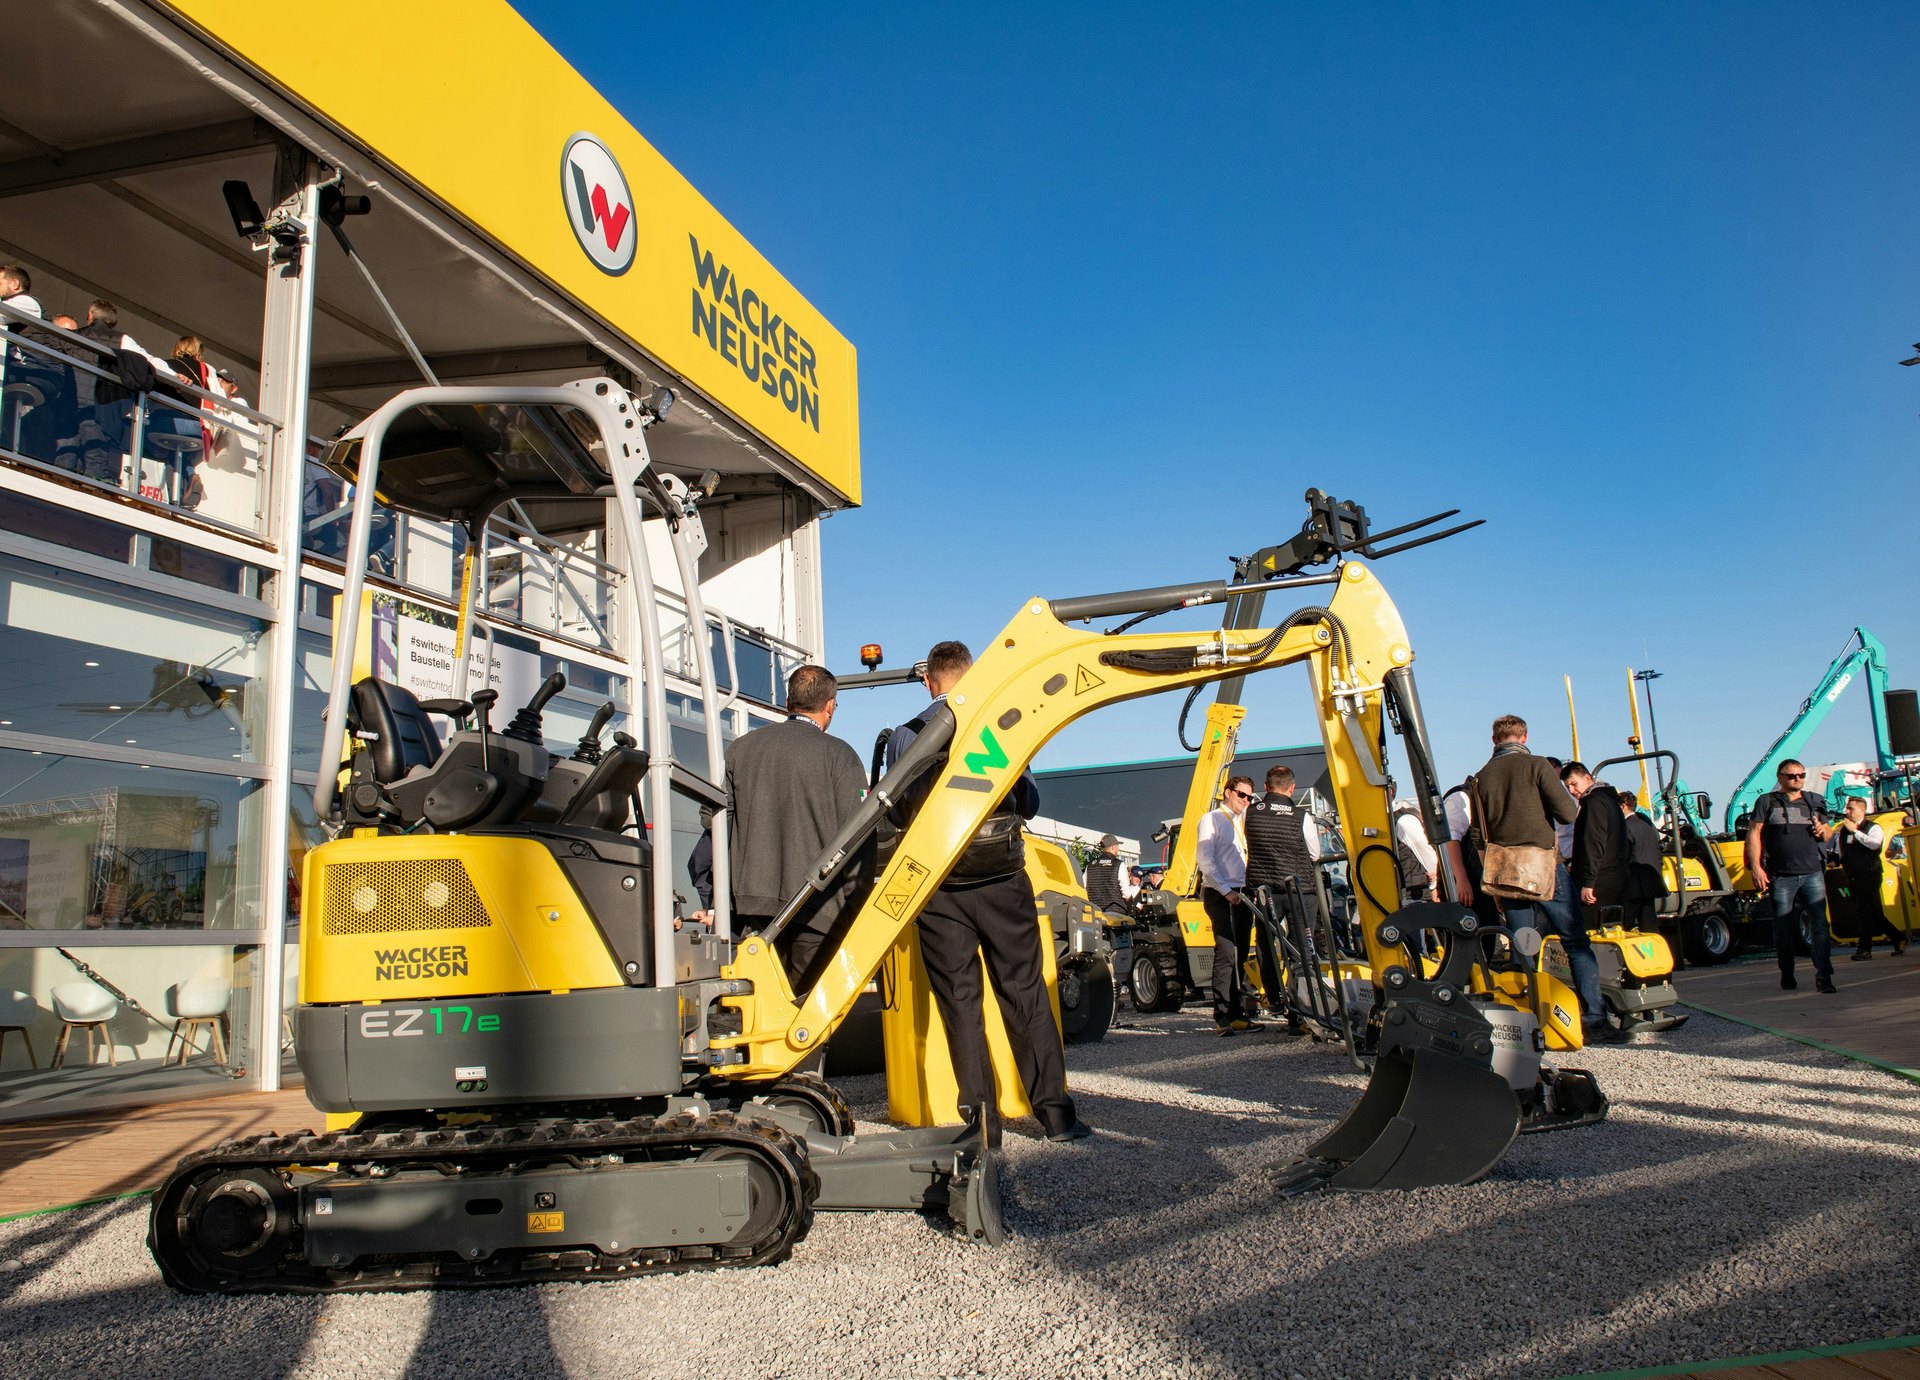 konvergens bypass Mange farlige situationer Wacker Neuson to Exhibit Battery-powered Excavator at CONEXPO | For  Construction Pros